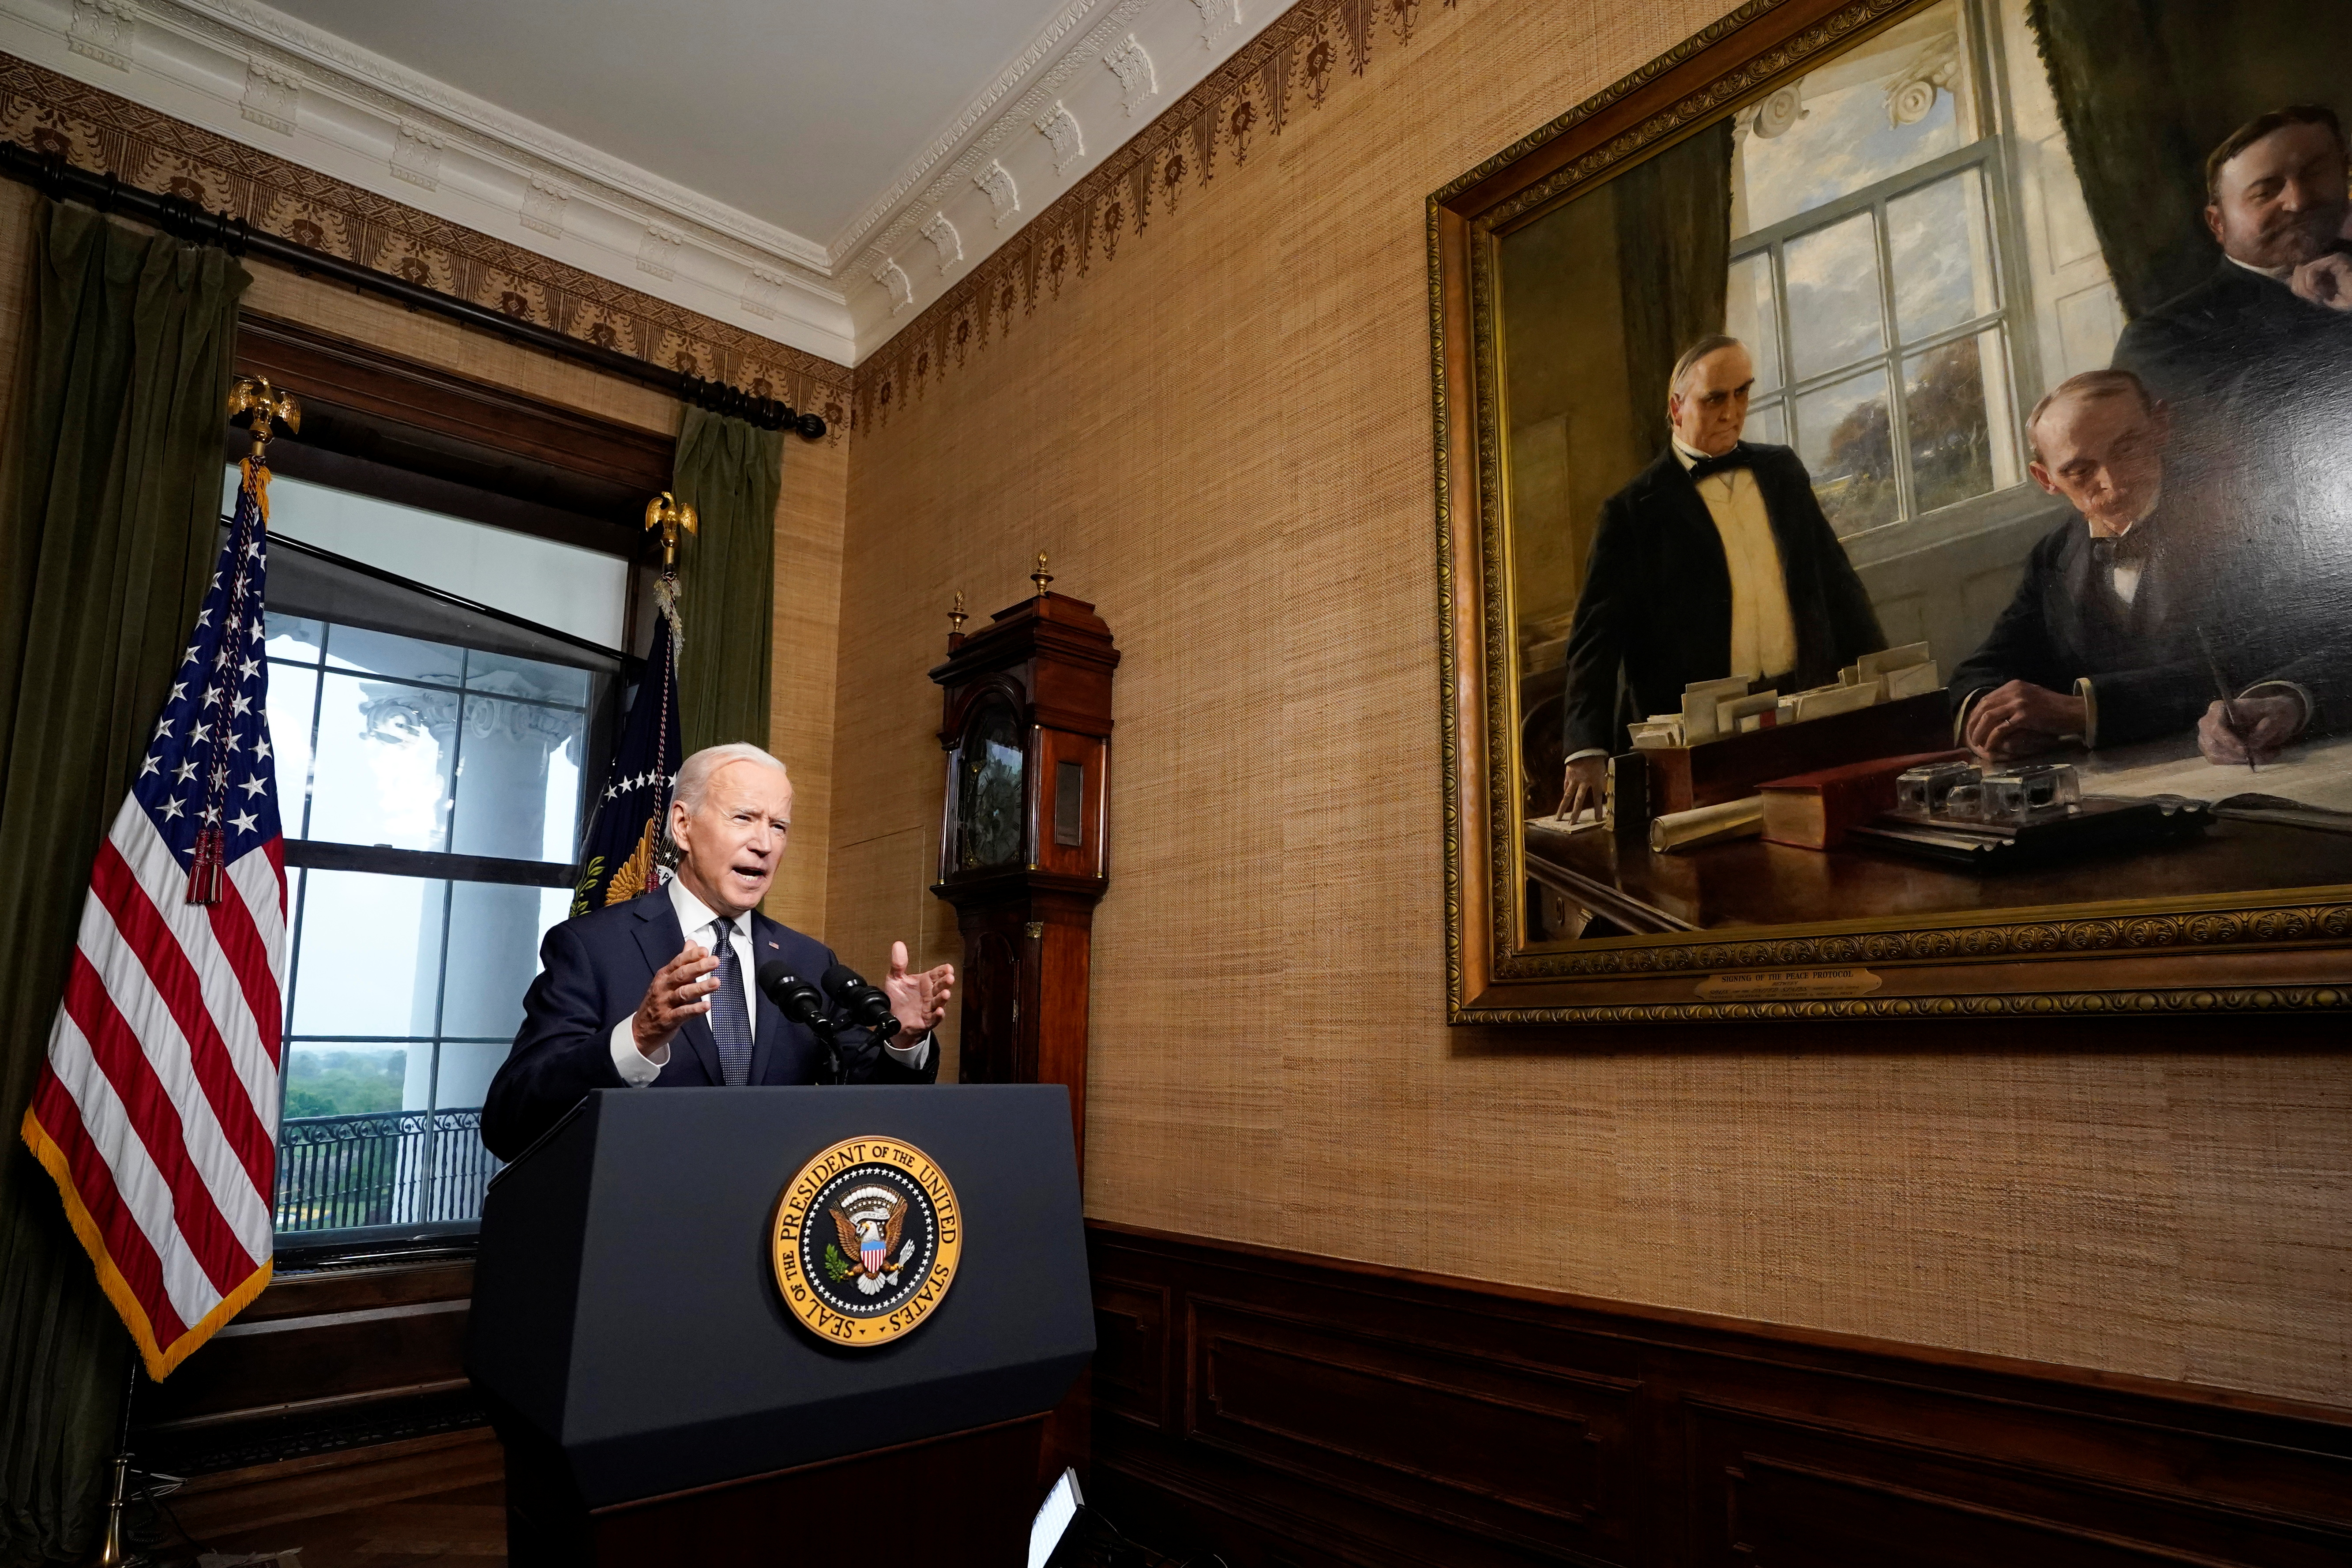 U.S. President Joe Biden delivers remarks on his plan to withdraw American troops from Afghanistan, at the White House, Washington, U.S., April 14, 2021. Andrew Harnik/Pool via REUTERS